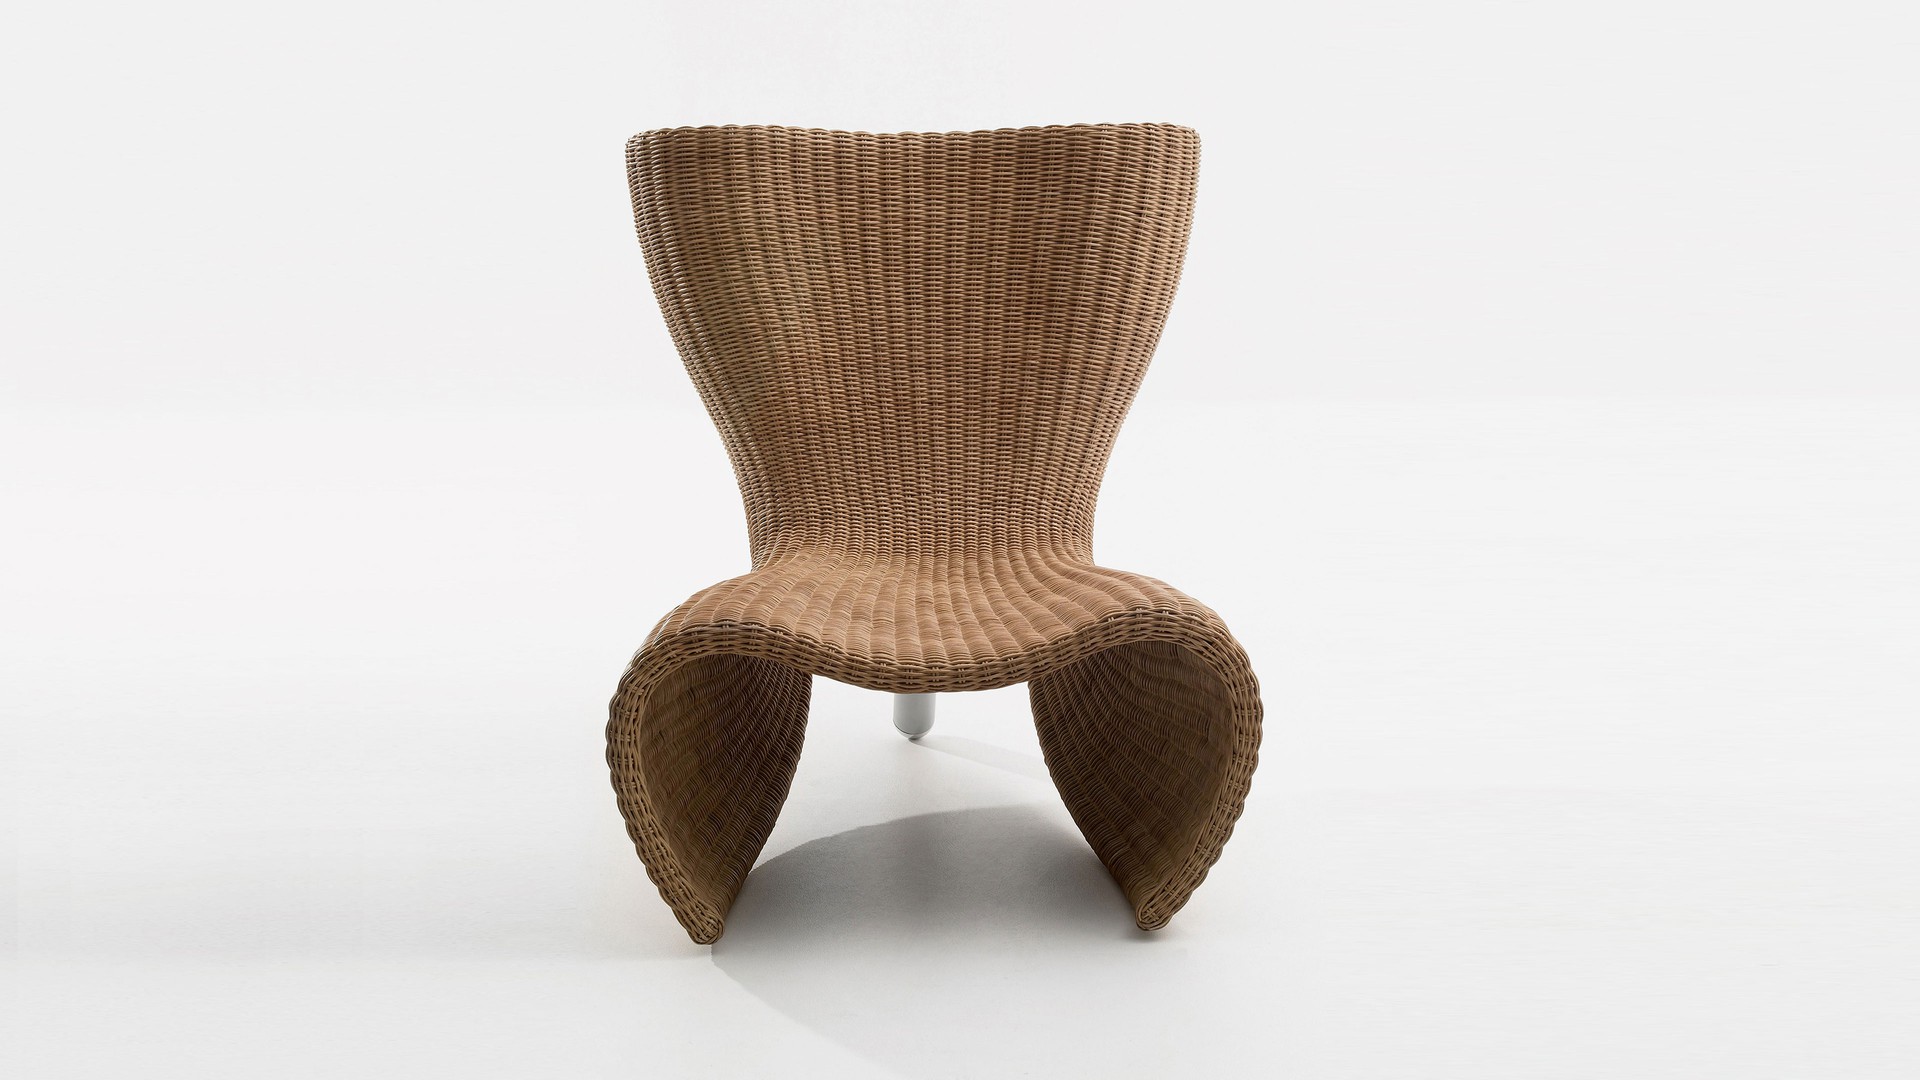 Wicker Chair and Lounge